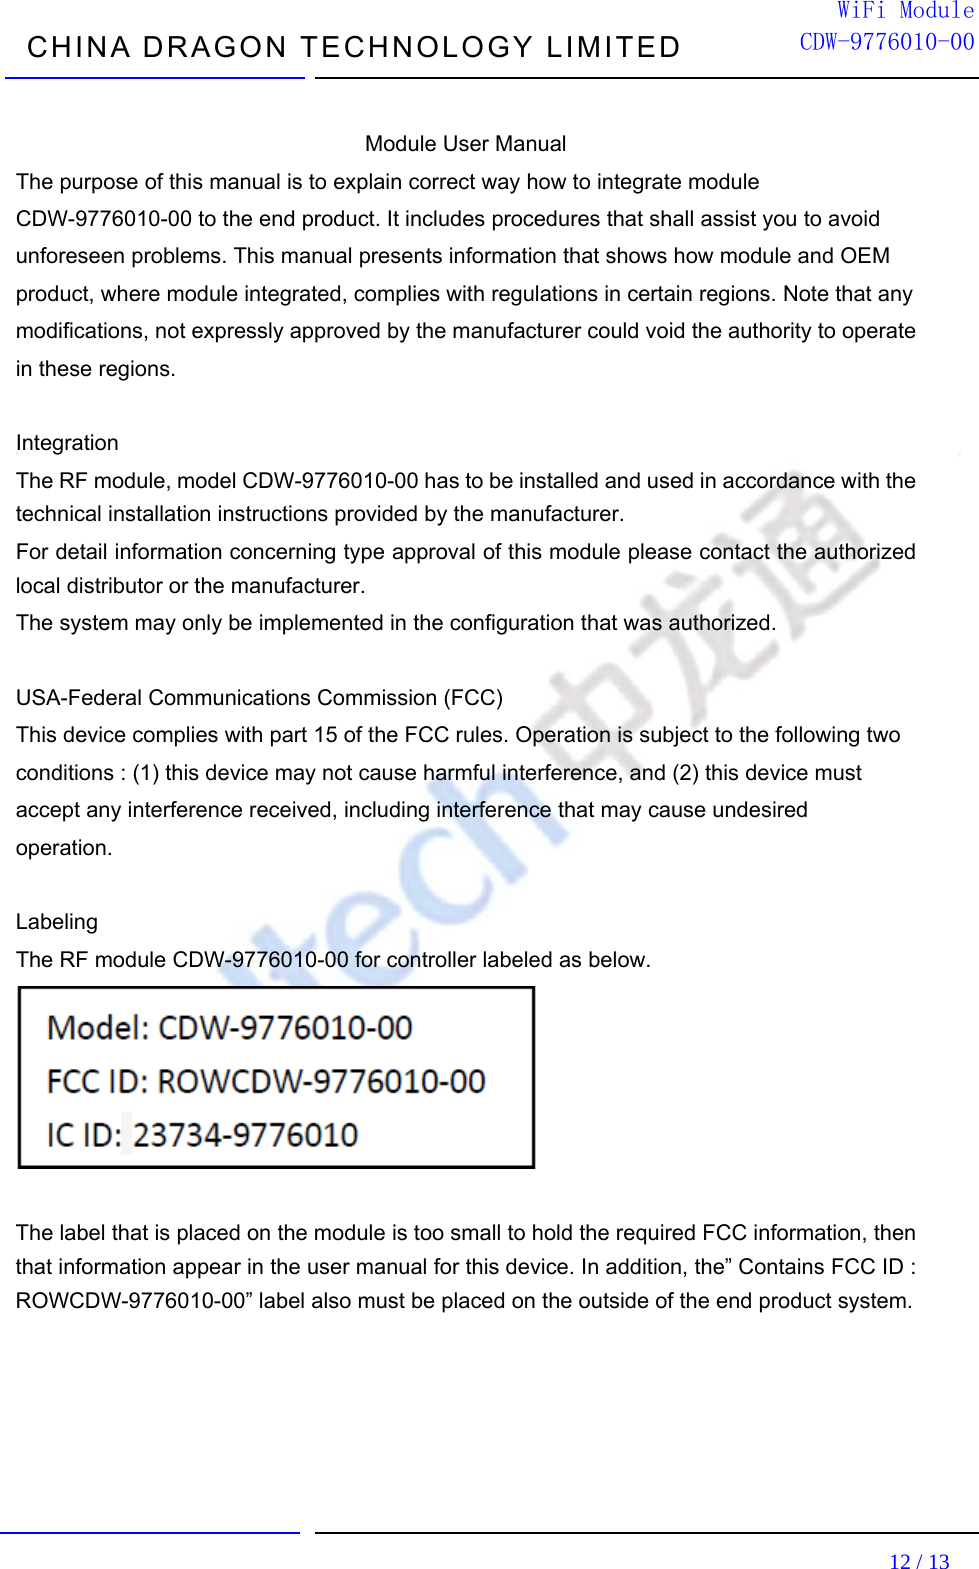  CHINA DRAGON TECHNOLOGY LIMITED                                                                         12 / 13  WiFi ModuleCDW-9776010-00 Module User Manual The purpose of this manual is to explain correct way how to integrate module CDW-9776010-00 to the end product. It includes procedures that shall assist you to avoid unforeseen problems. This manual presents information that shows how module and OEM product, where module integrated, complies with regulations in certain regions. Note that any modifications, not expressly approved by the manufacturer could void the authority to operate in these regions.  Integration  The RF module, model CDW-9776010-00 has to be installed and used in accordance with the   technical installation instructions provided by the manufacturer.     For detail information concerning type approval of this module please contact the authorized local distributor or the manufacturer.     The system may only be implemented in the configuration that was authorized.  USA-Federal Communications Commission (FCC)   This device complies with part 15 of the FCC rules. Operation is subject to the following two conditions : (1) this device may not cause harmful interference, and (2) this device must accept any interference received, including interference that may cause undesired operation.  Labeling   The RF module CDW-9776010-00 for controller labeled as below.   The label that is placed on the module is too small to hold the required FCC information, then that information appear in the user manual for this device. In addition, the” Contains FCC ID : ROWCDW-9776010-00” label also must be placed on the outside of the end product system.      